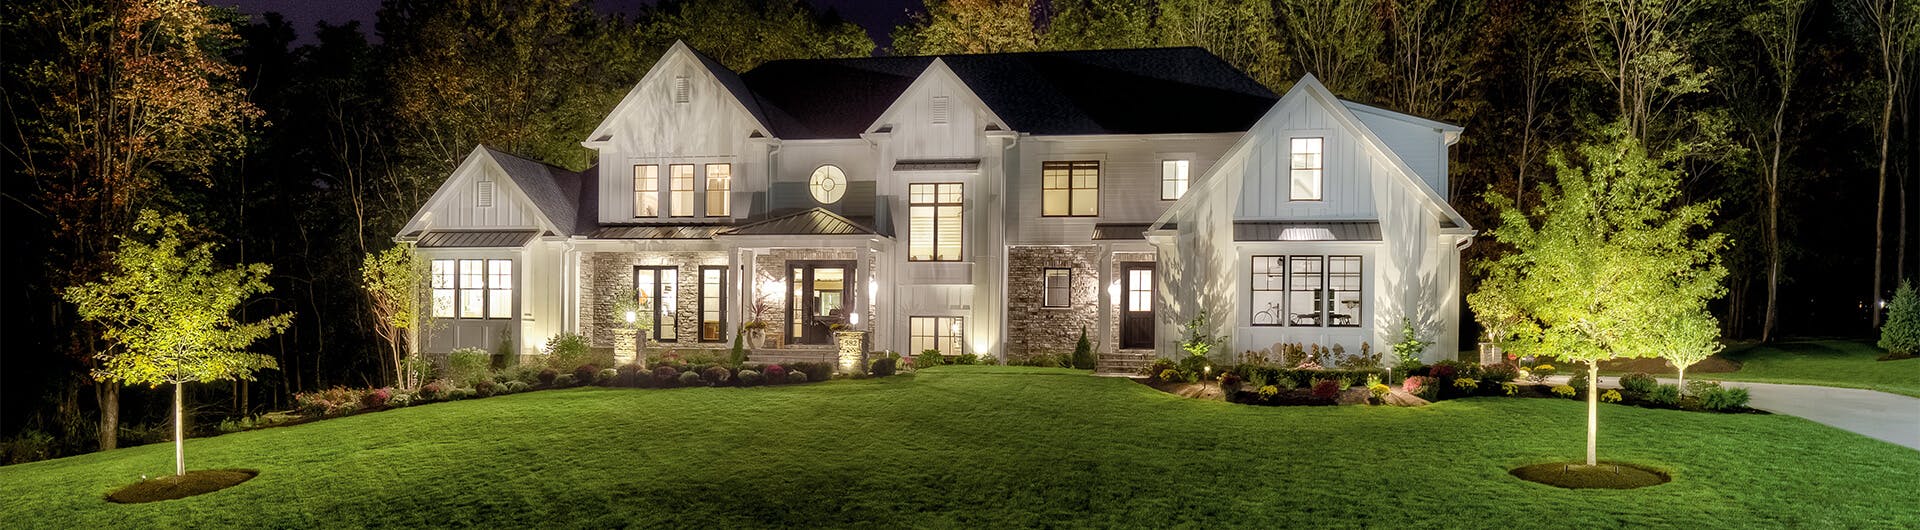 Modern farmhouse front exterior landscape lit up with different outdoor landscape lights at night 